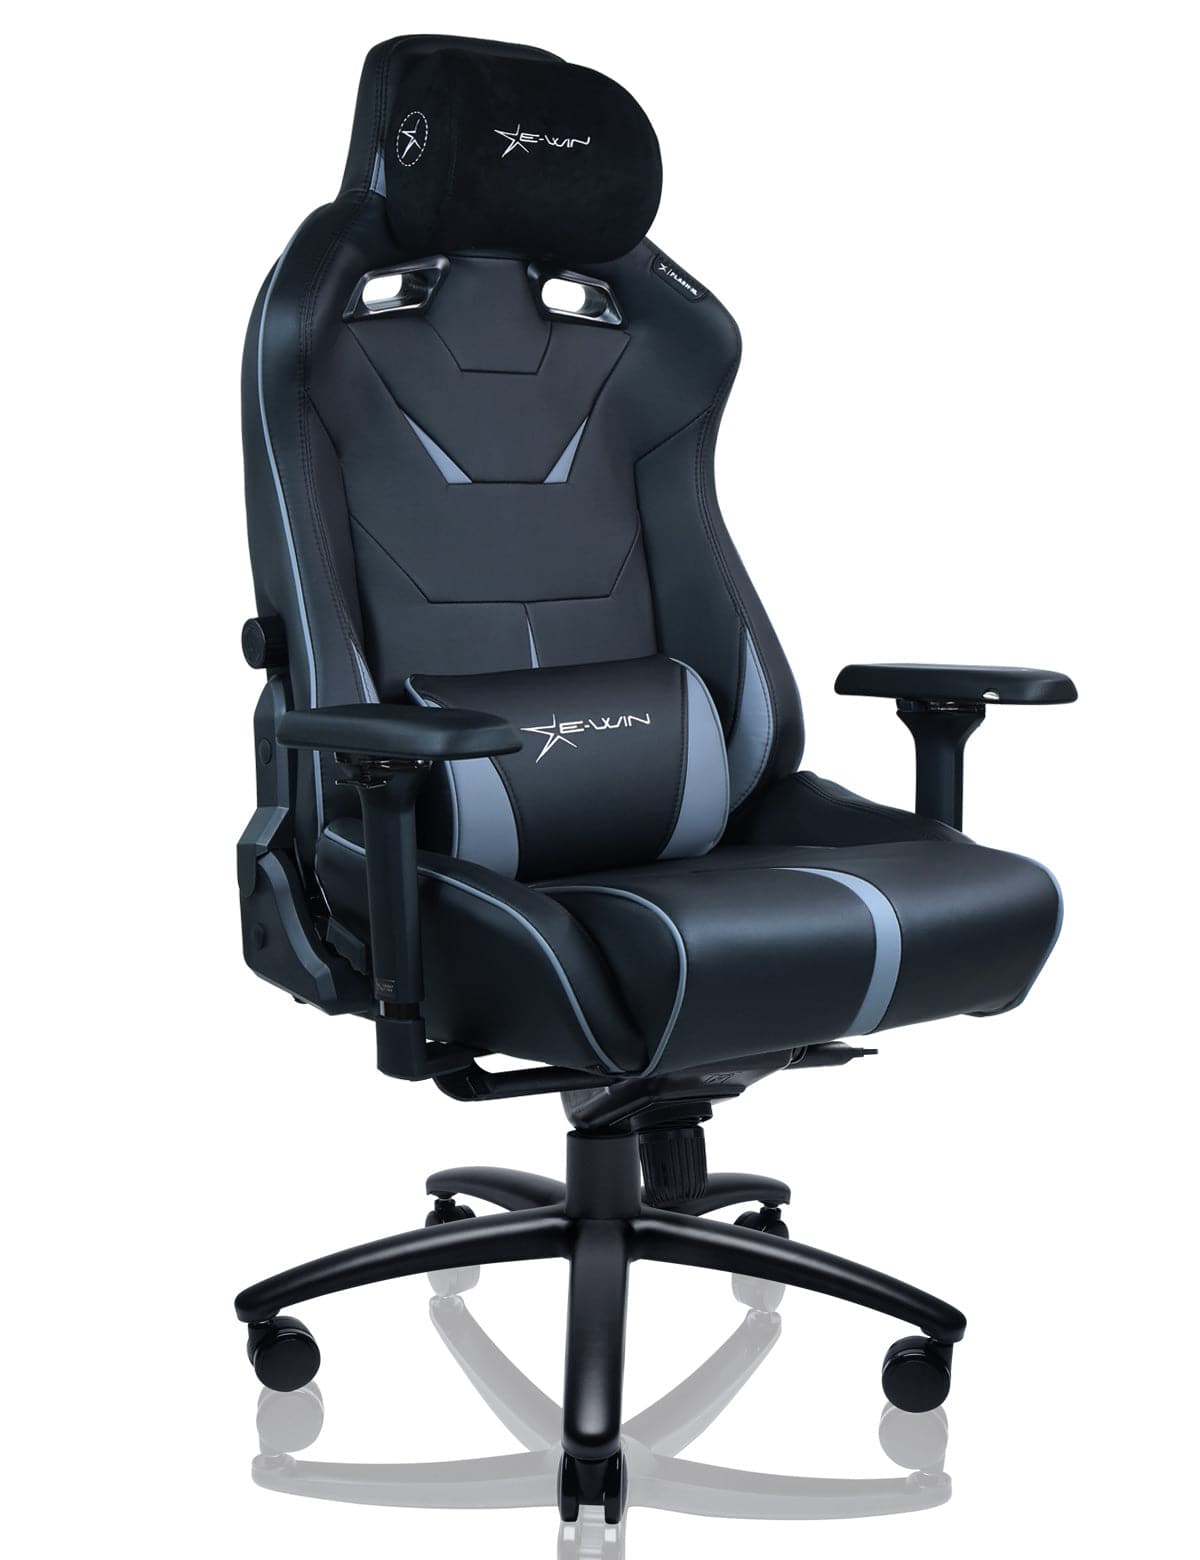 E-WIN Flash XL Size Upgraded Series Ergonomic Computer Gaming Office Chair with Pillows - FLB-XL-REV